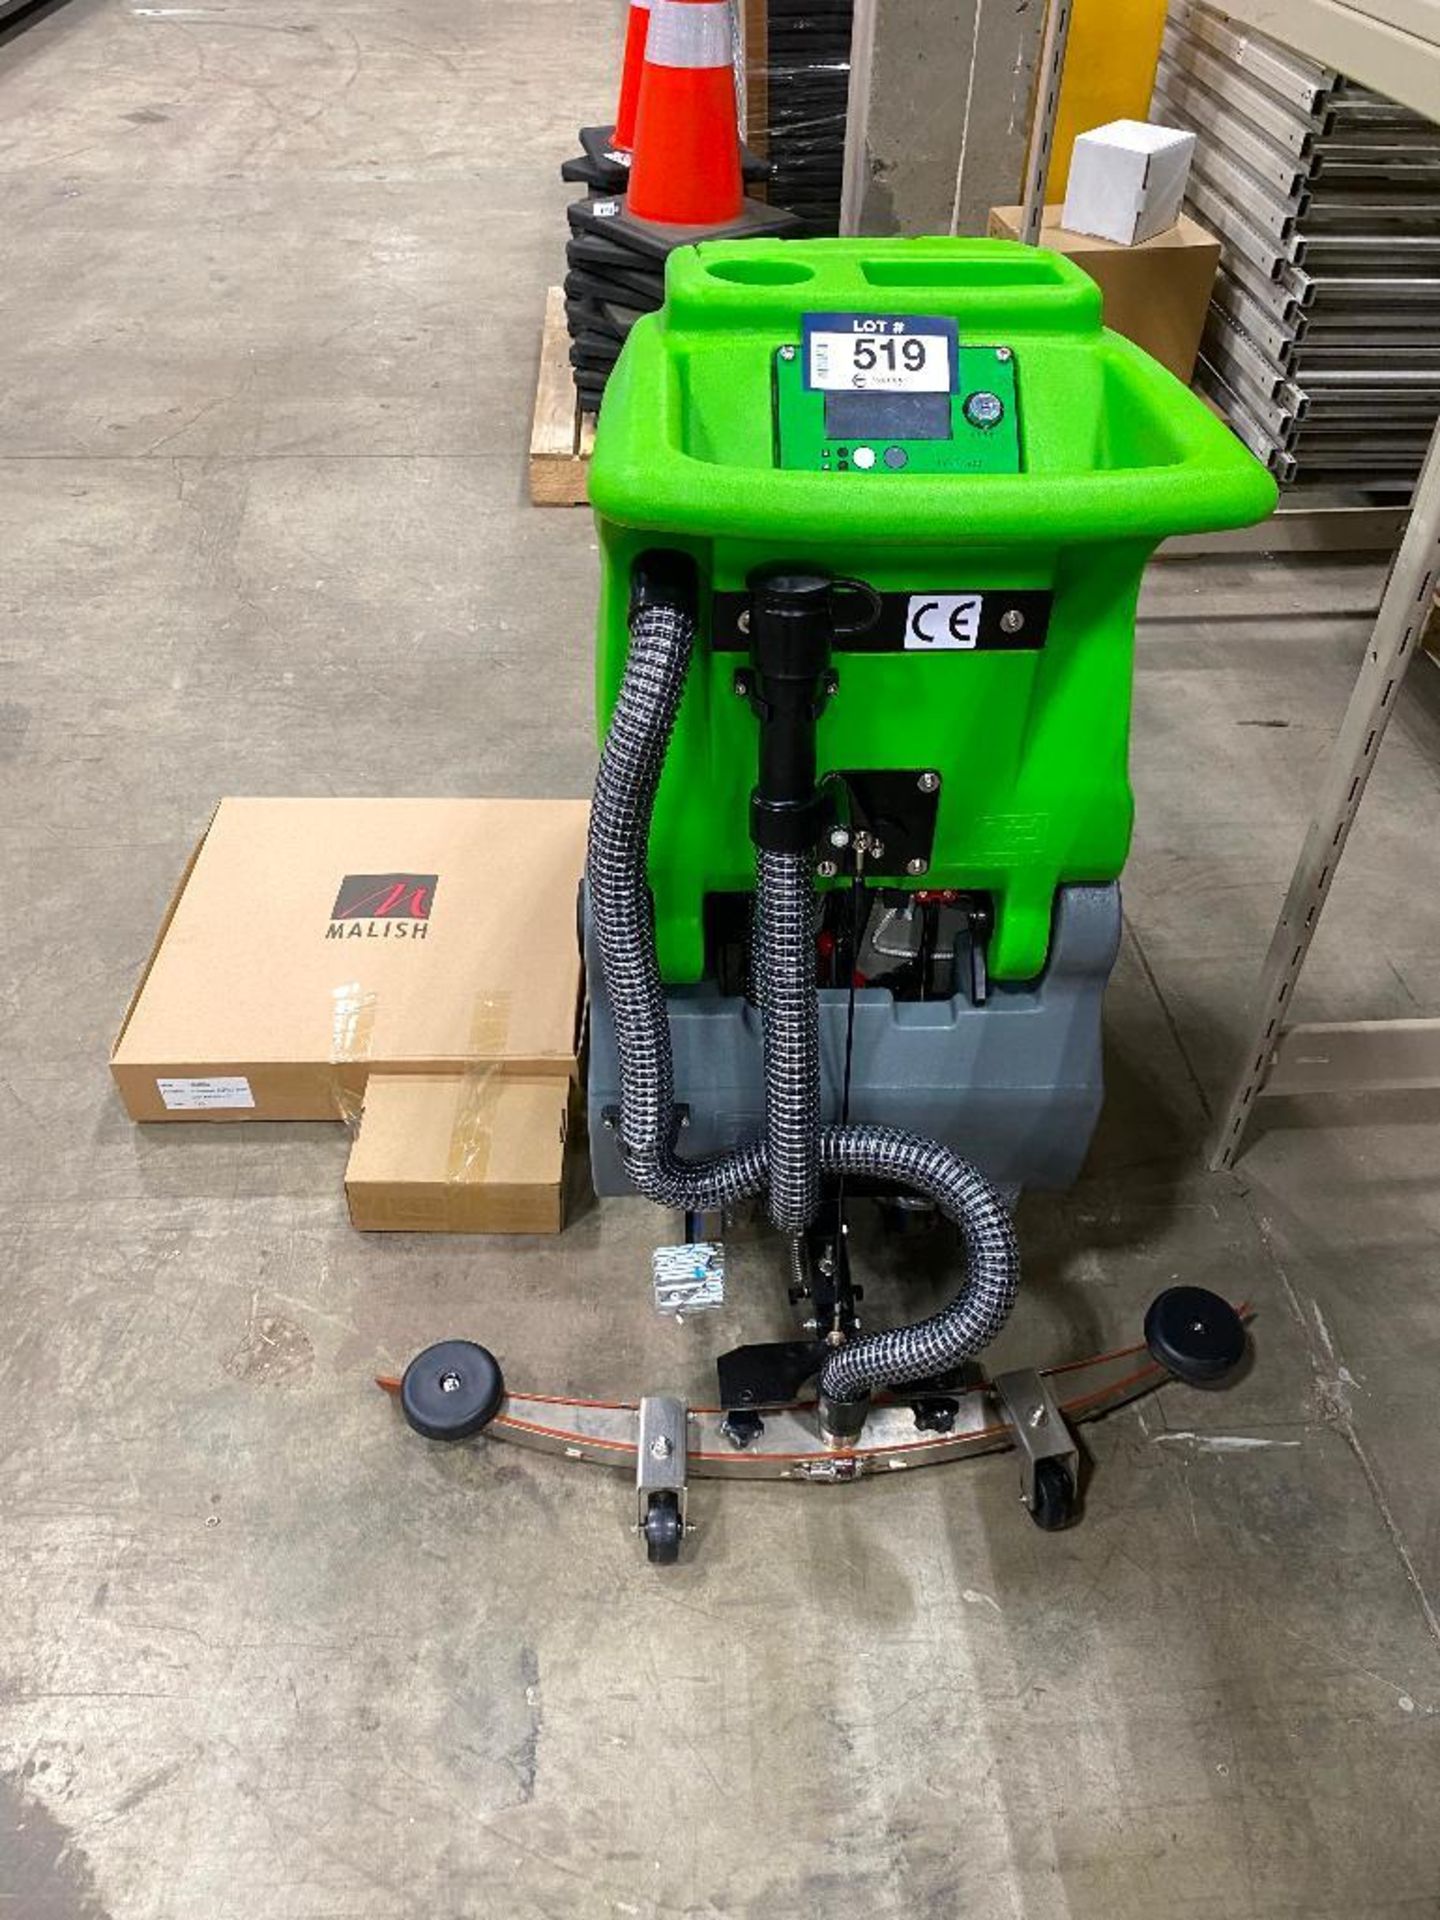 New 2022 Aokeqi OK-500 19" Wide Walk Behind Electric Industrial Semi-Auto Floor Scrubber - Image 3 of 6